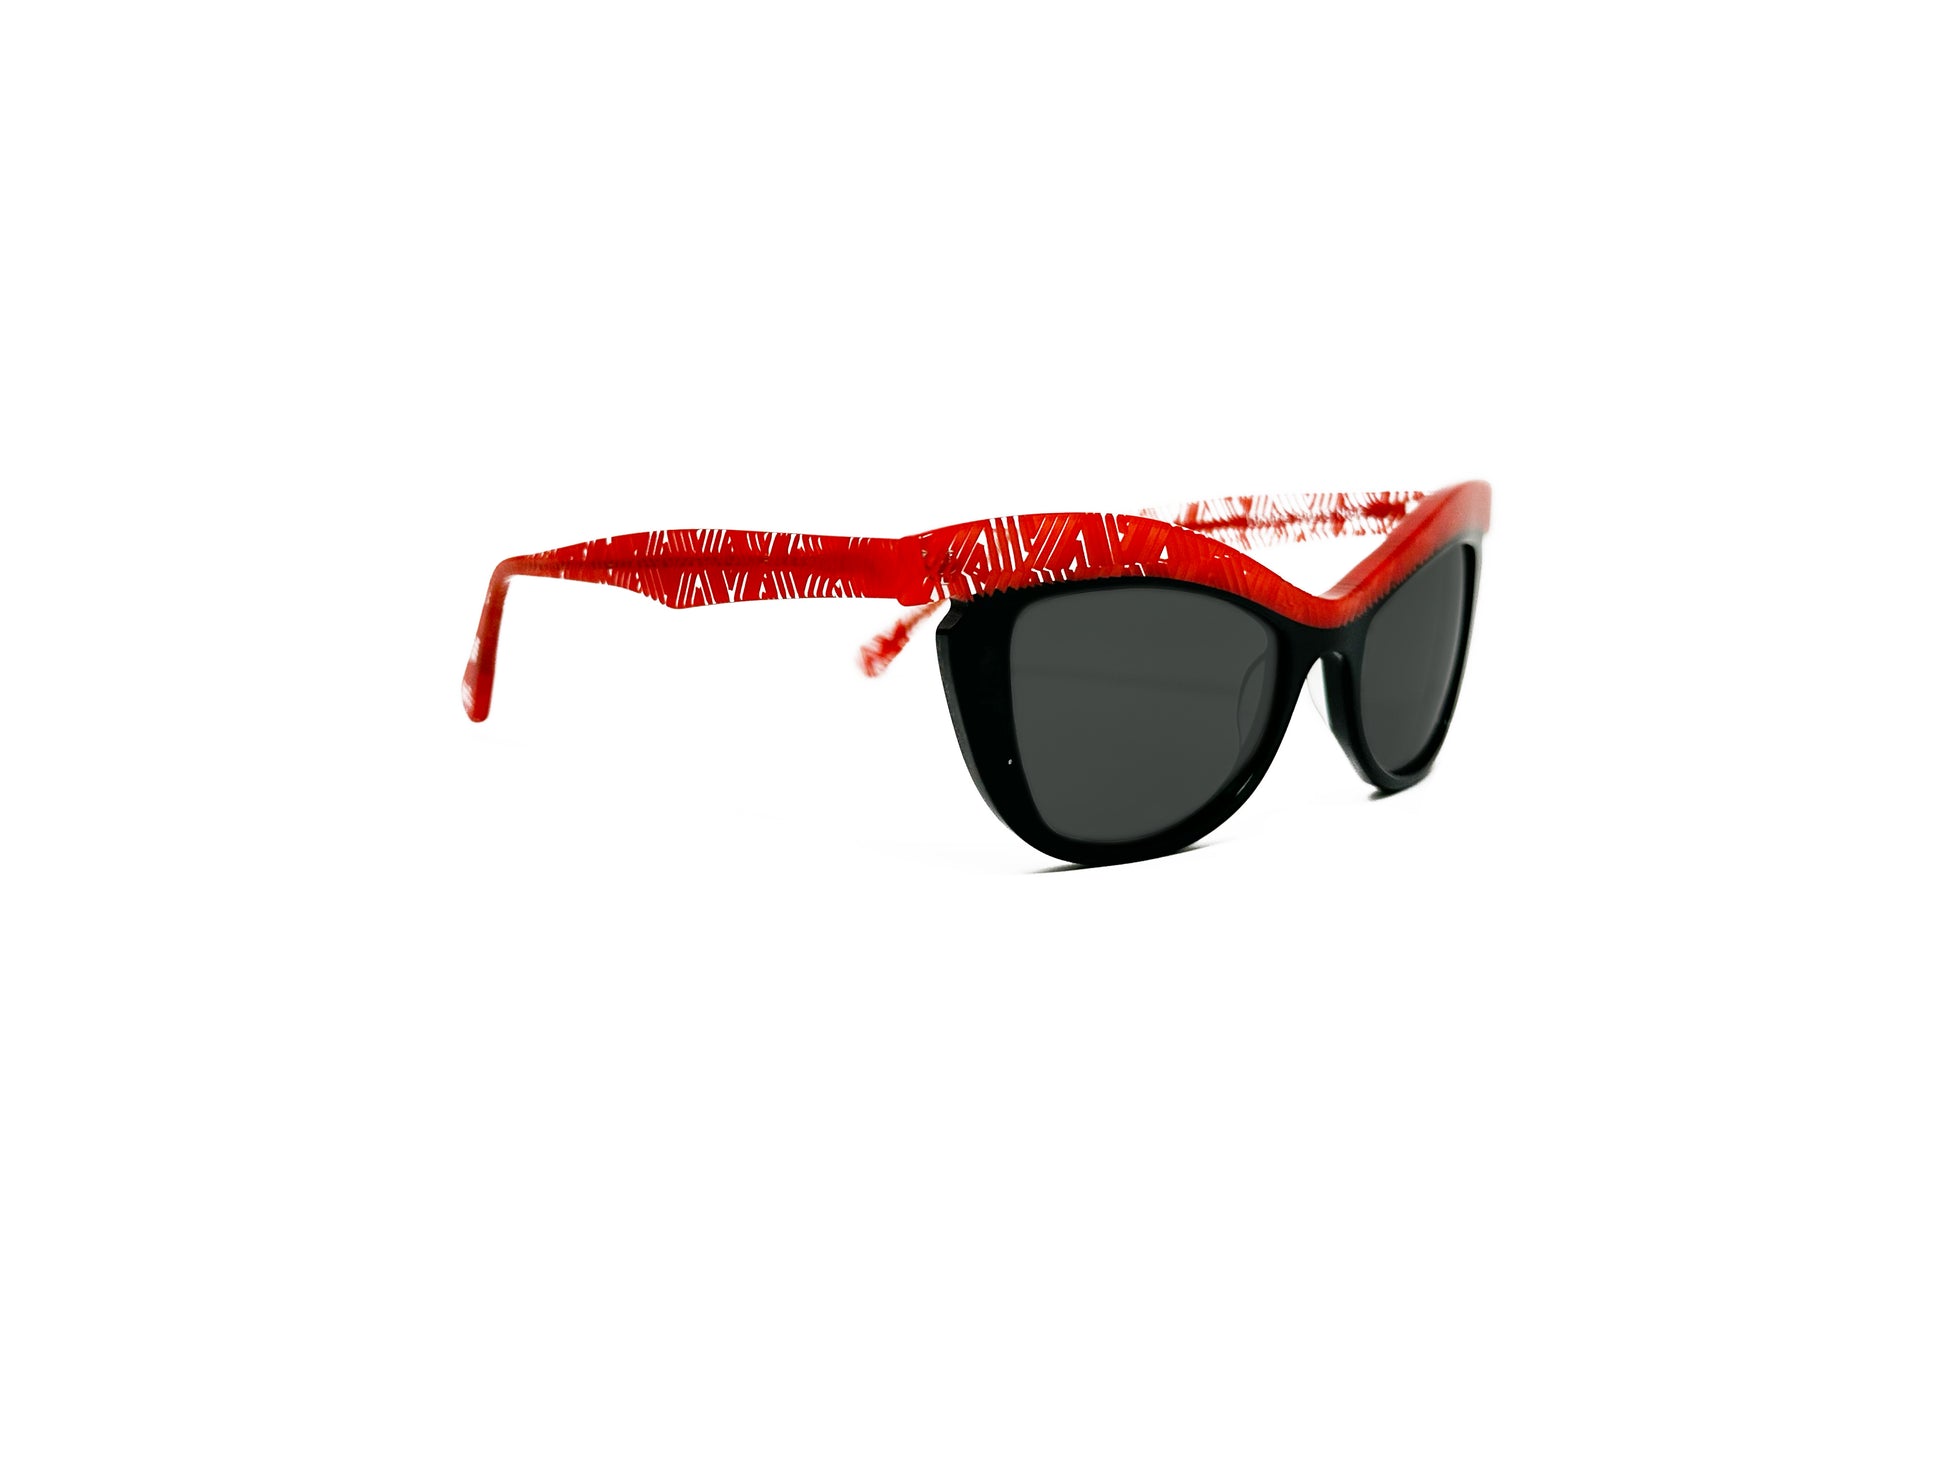 Traction Productions acetate cat-eye sunglass with elongated border across top. Model: Luxure. Color: Noir - Black with red and clear striped pattern on top border. Side view.